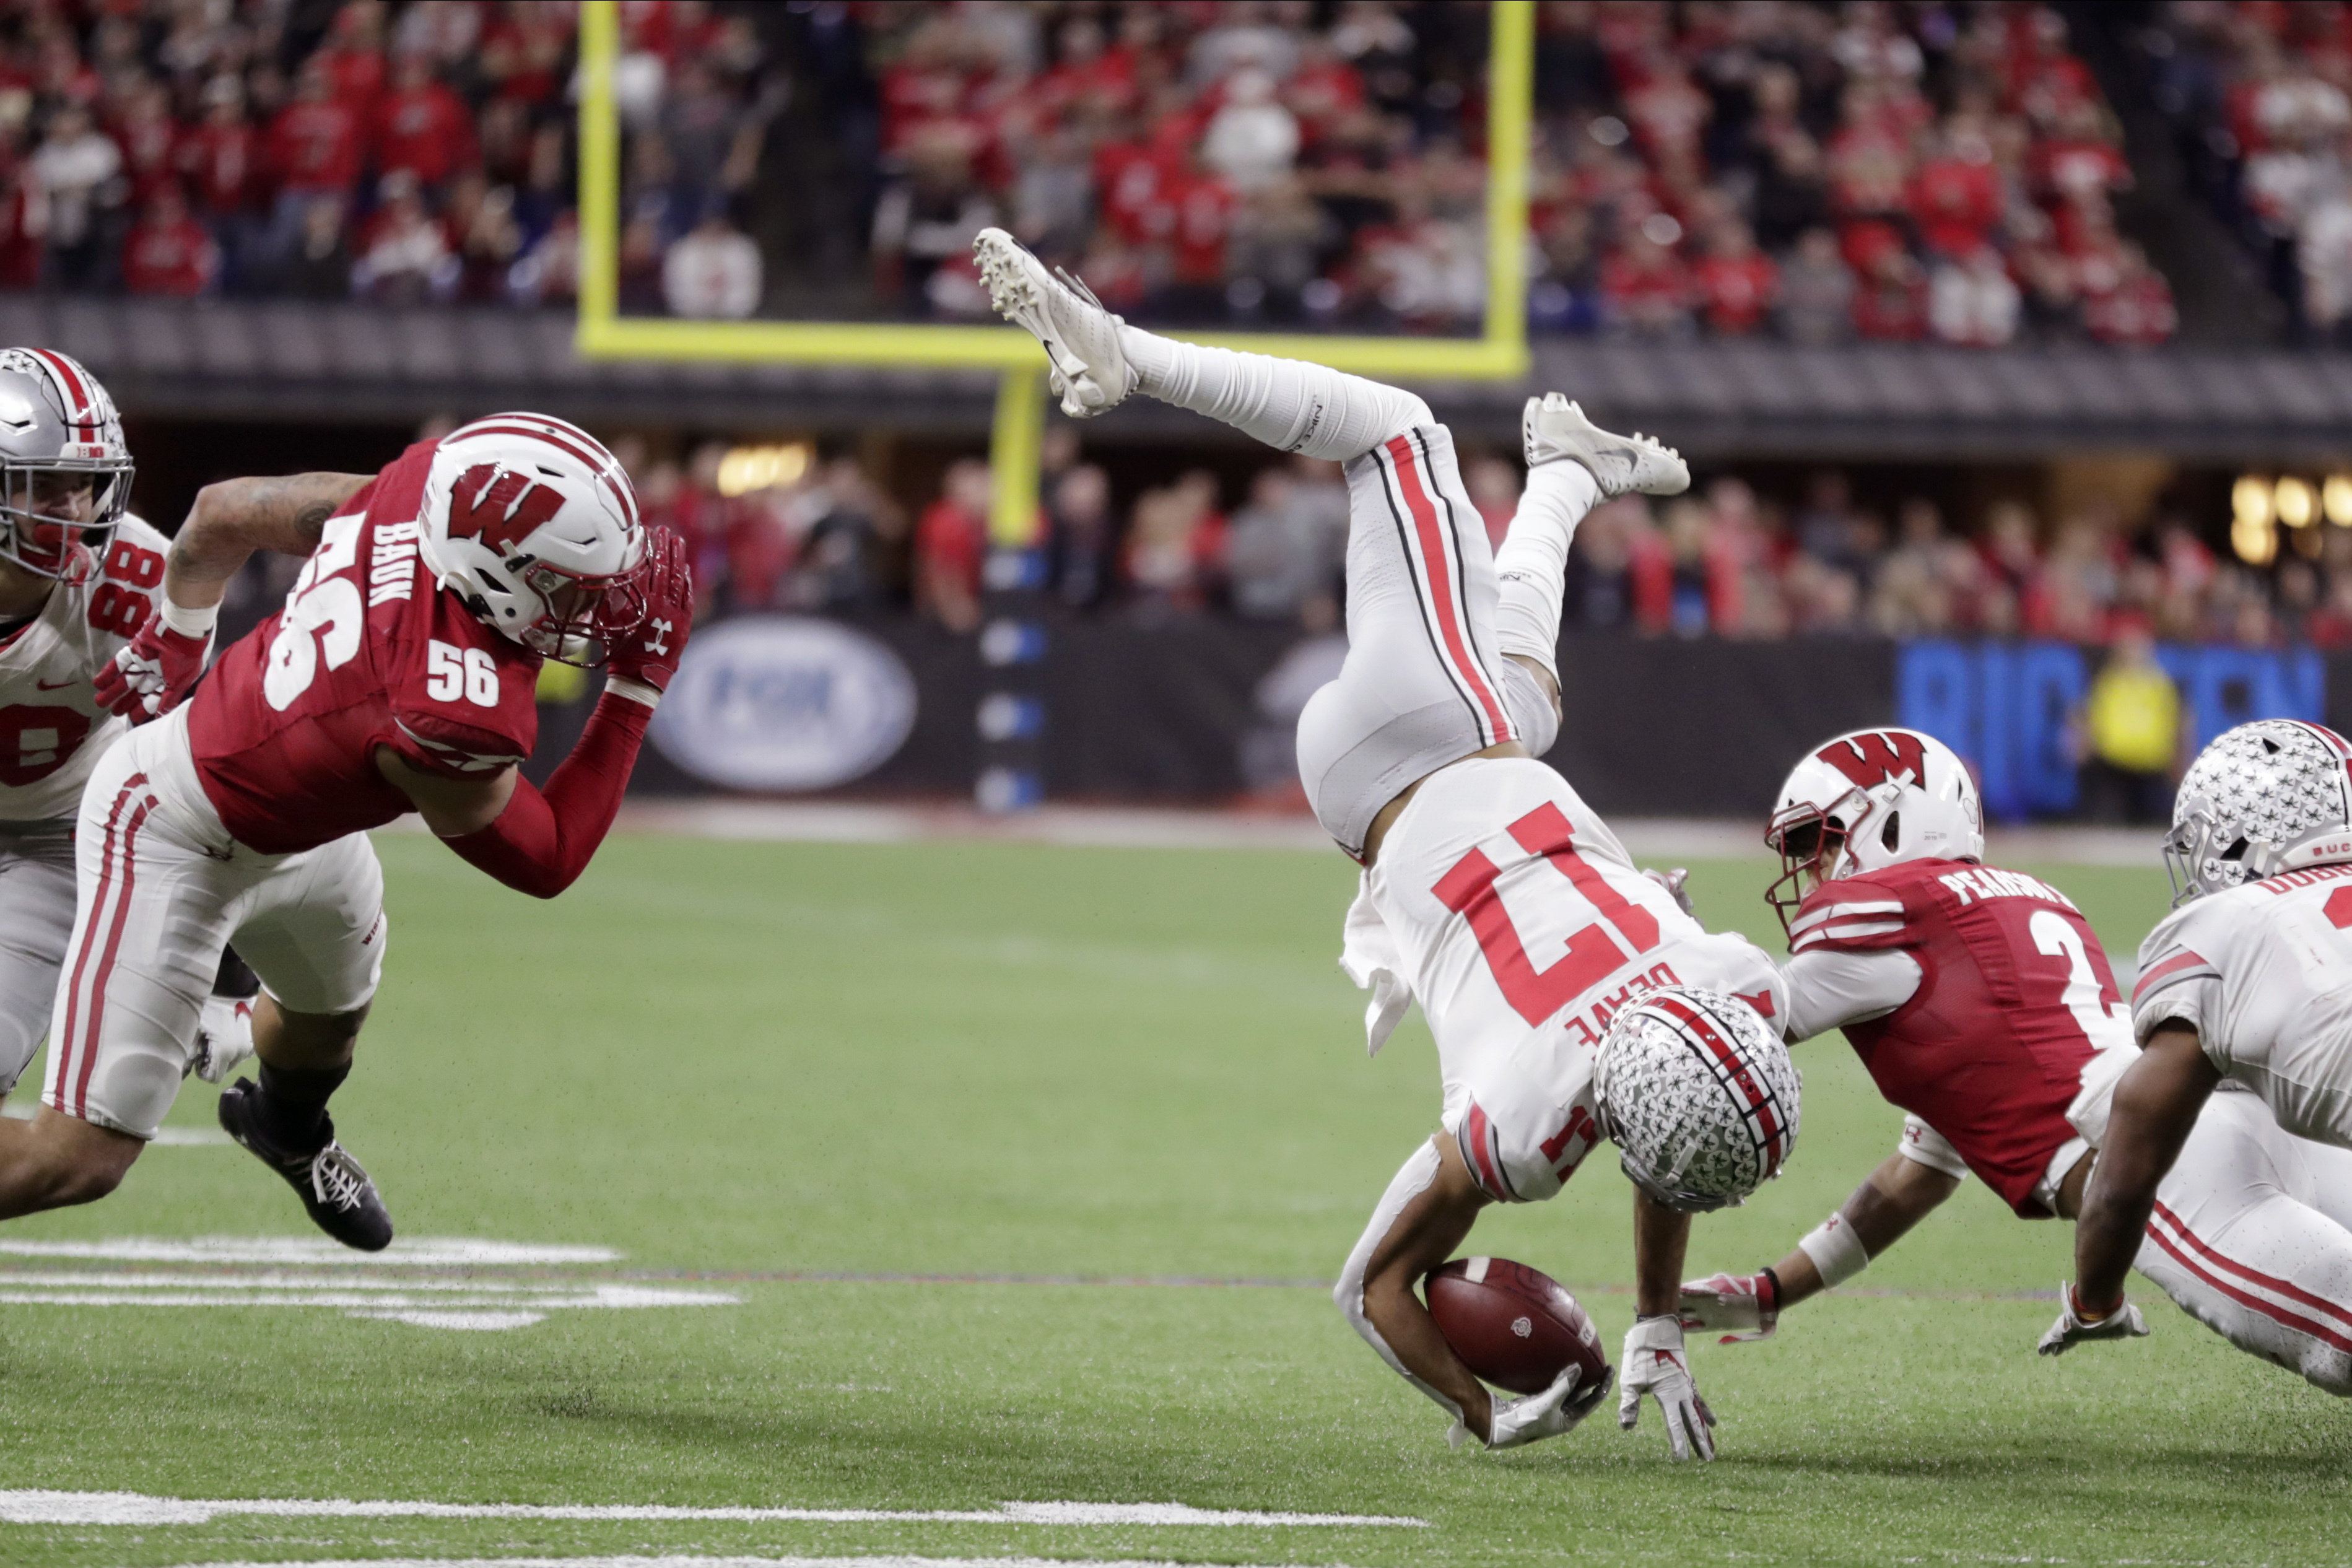 No. 2 Ohio State rallies for 3rd straight Big Ten title